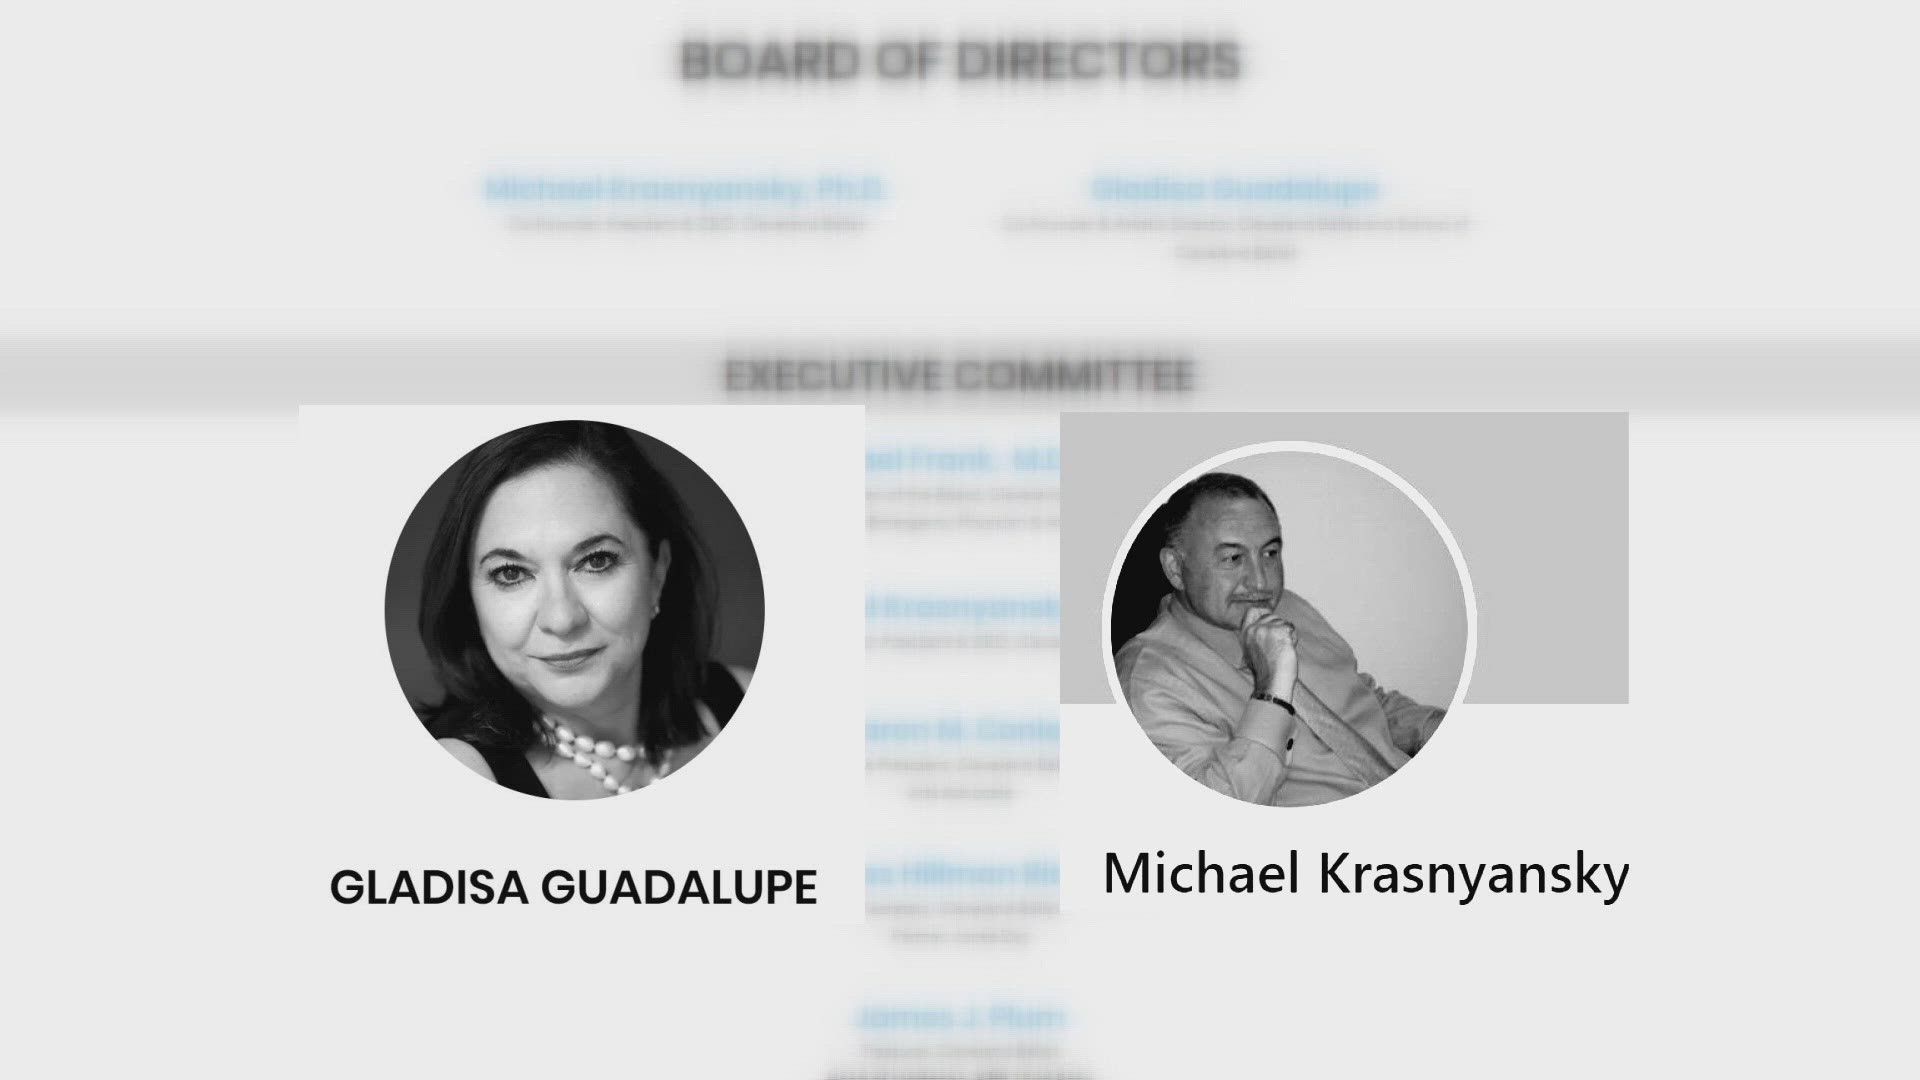 Artistic Director Gladisa Guadalupe and CEO Michael Krasnyansky, who are also married, are suspended pending internal and external reviews.